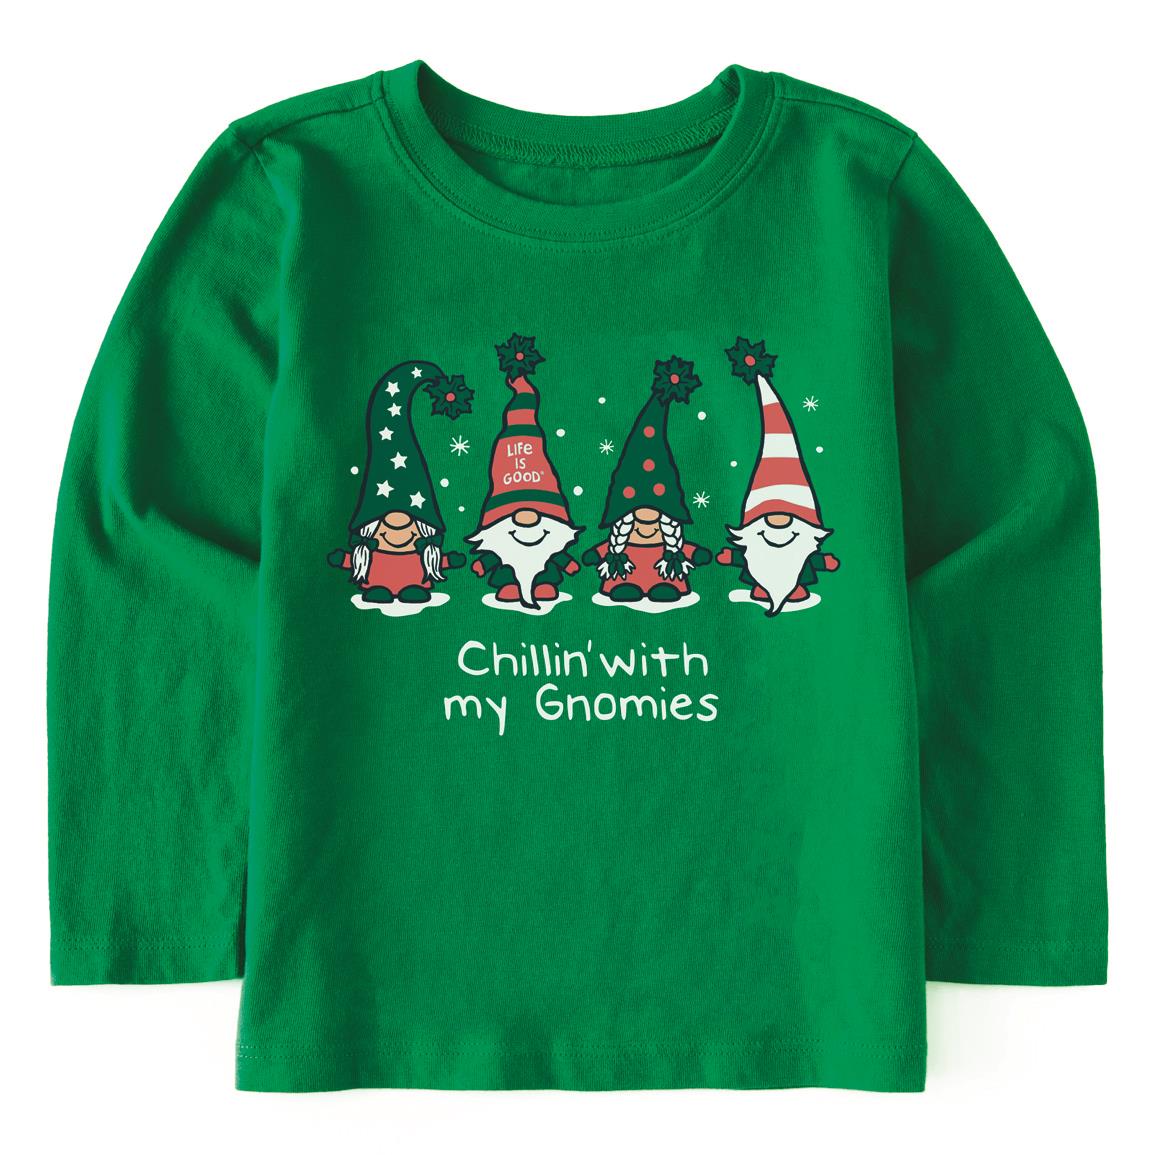 Life Is Good Toddler Chillin' With My Gnomes Family Crusher Shirt, Kelly Green